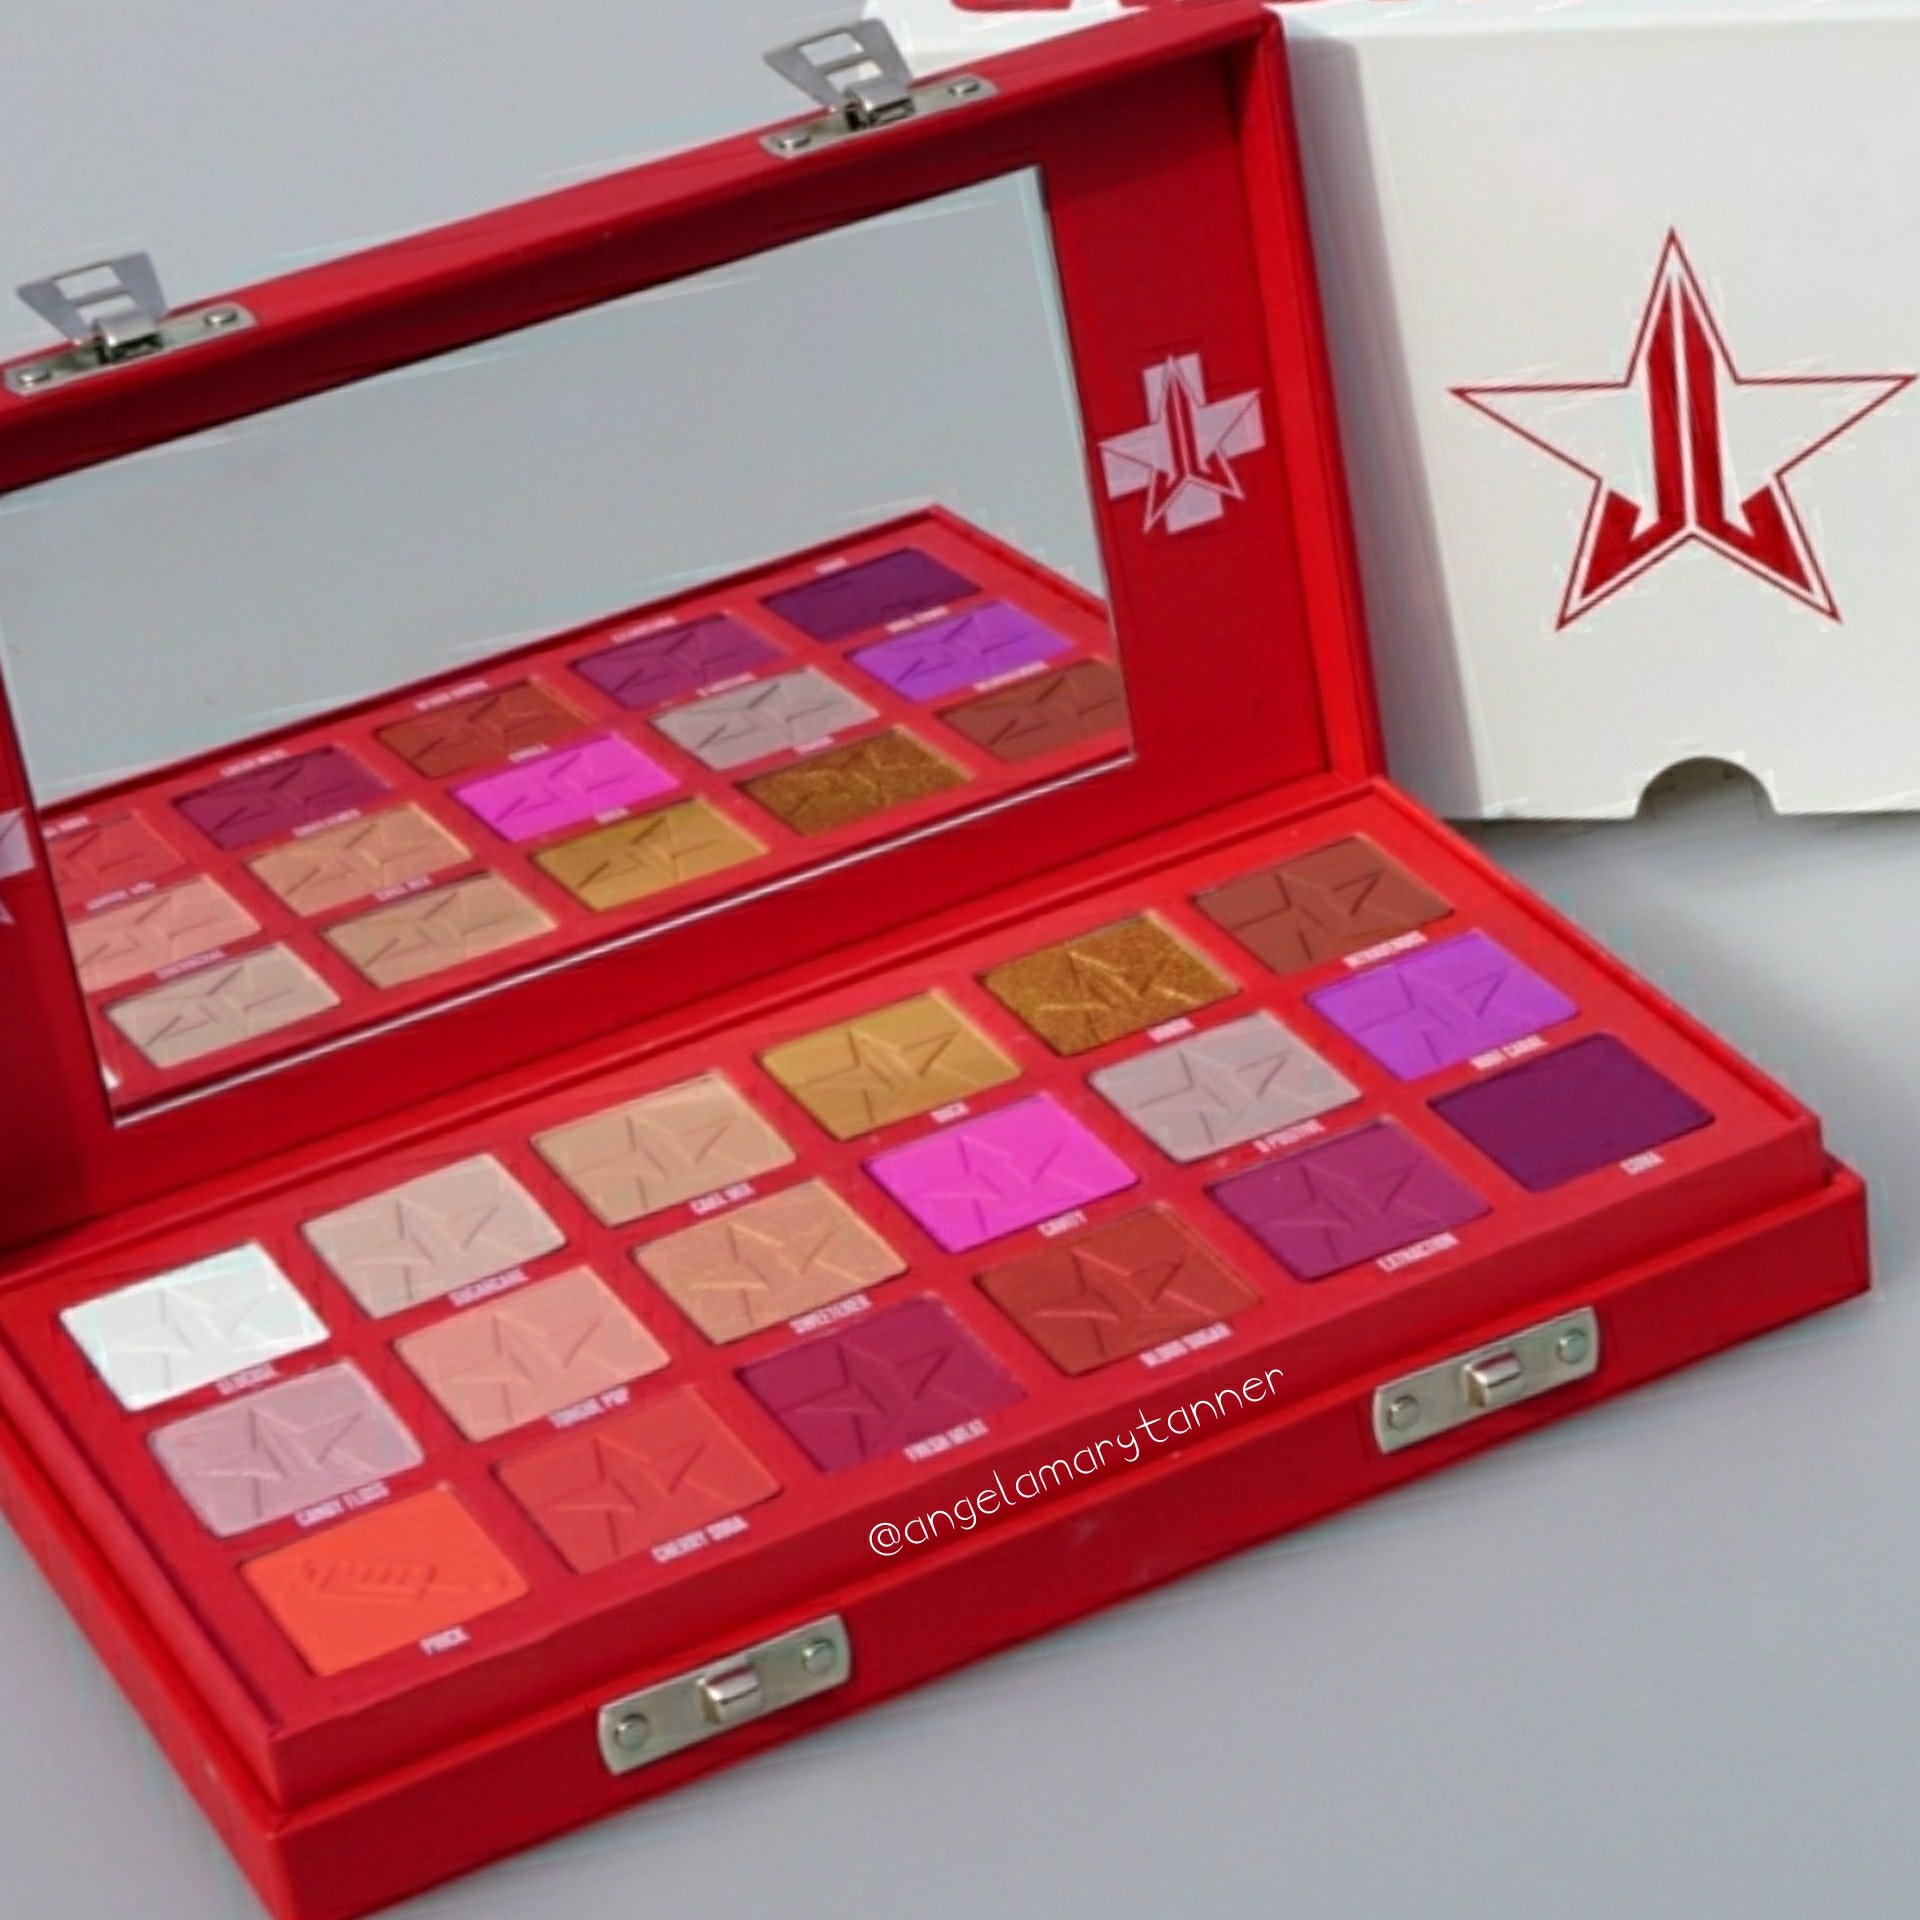 JEFFREE STAR 'BLOOD SUGAR' PALETTE: REVIEW and SWATCHES – Our 